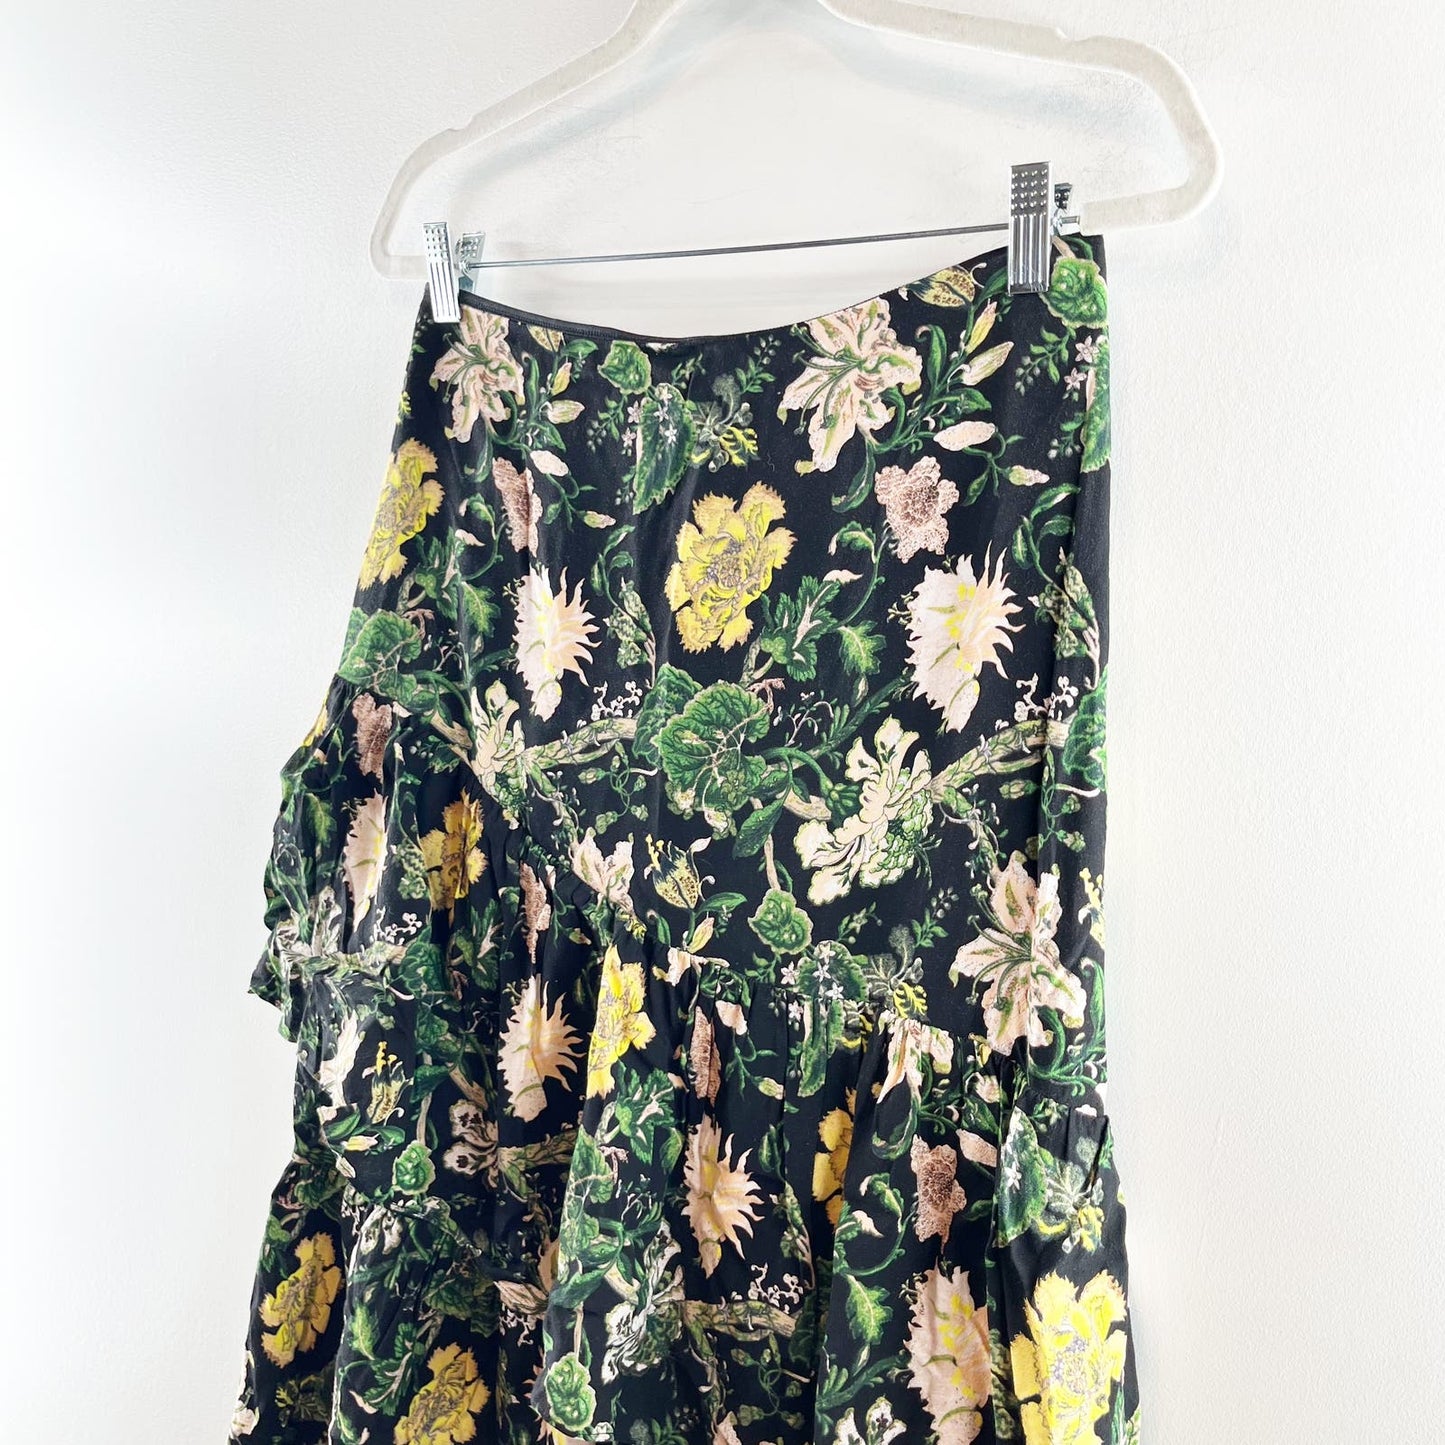 Club Monaco Floral Tiered Lined Midi Skirt Black Yellow Green 6